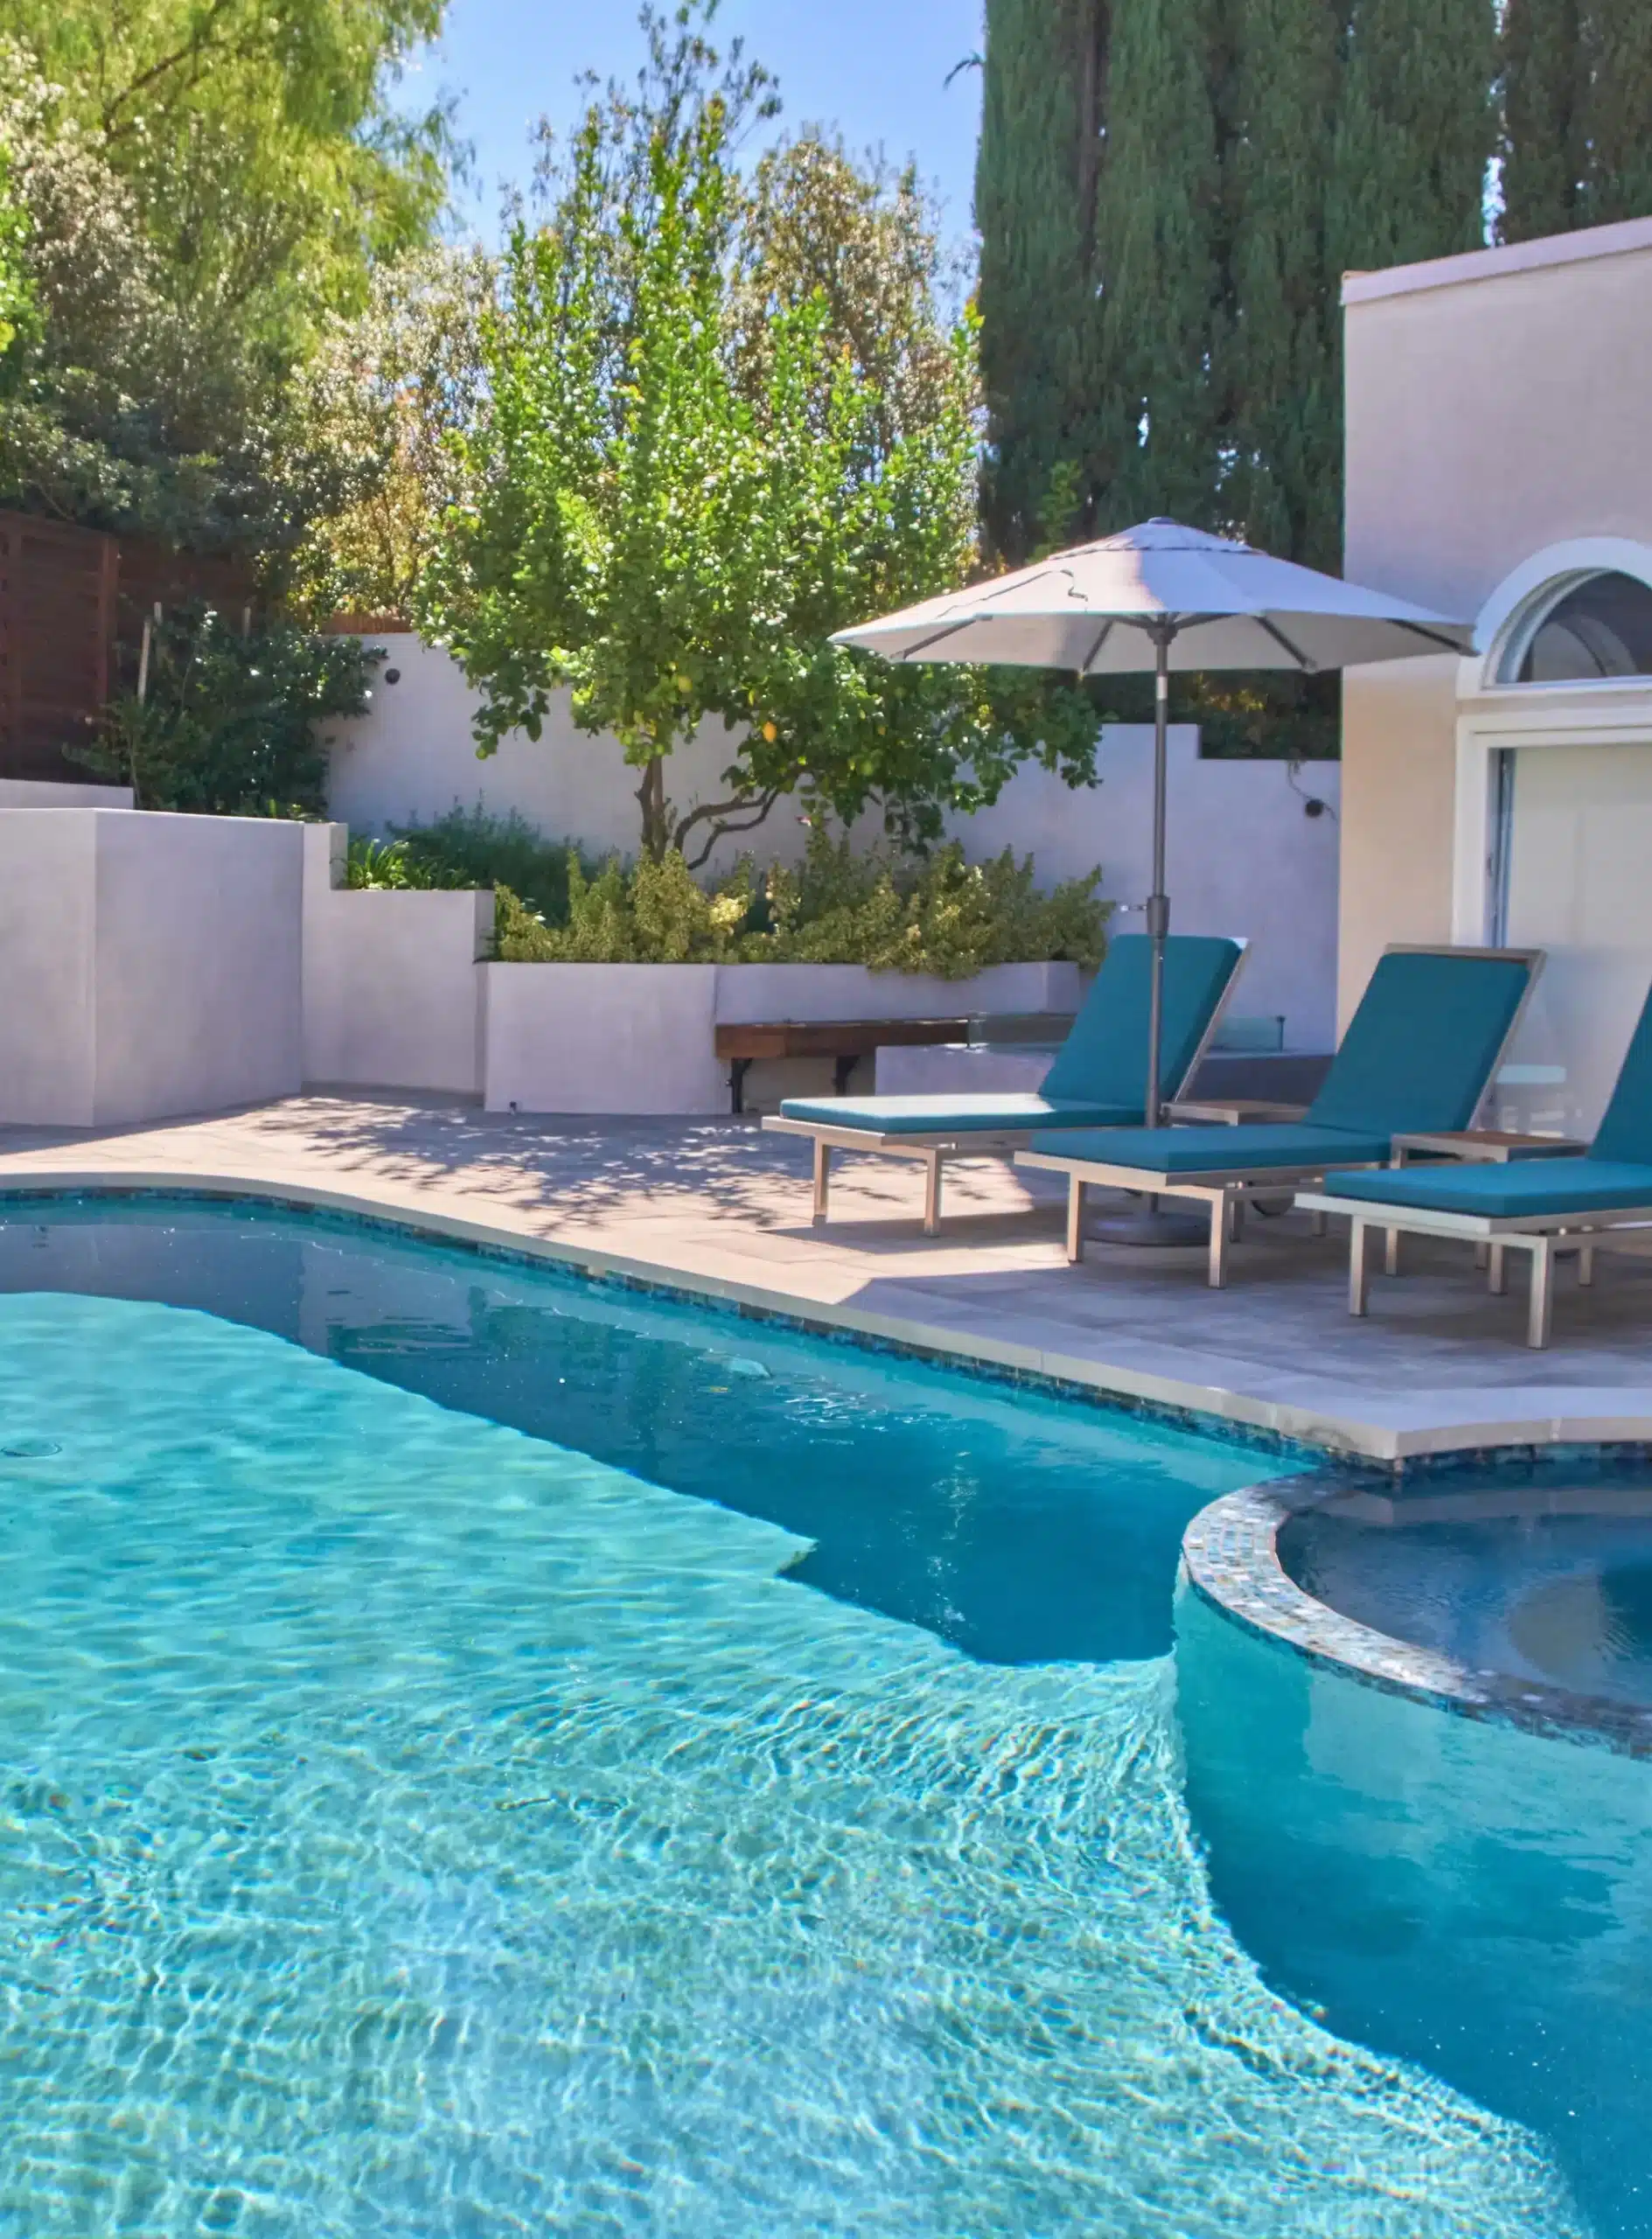 Remodel or Replaster Your Pool